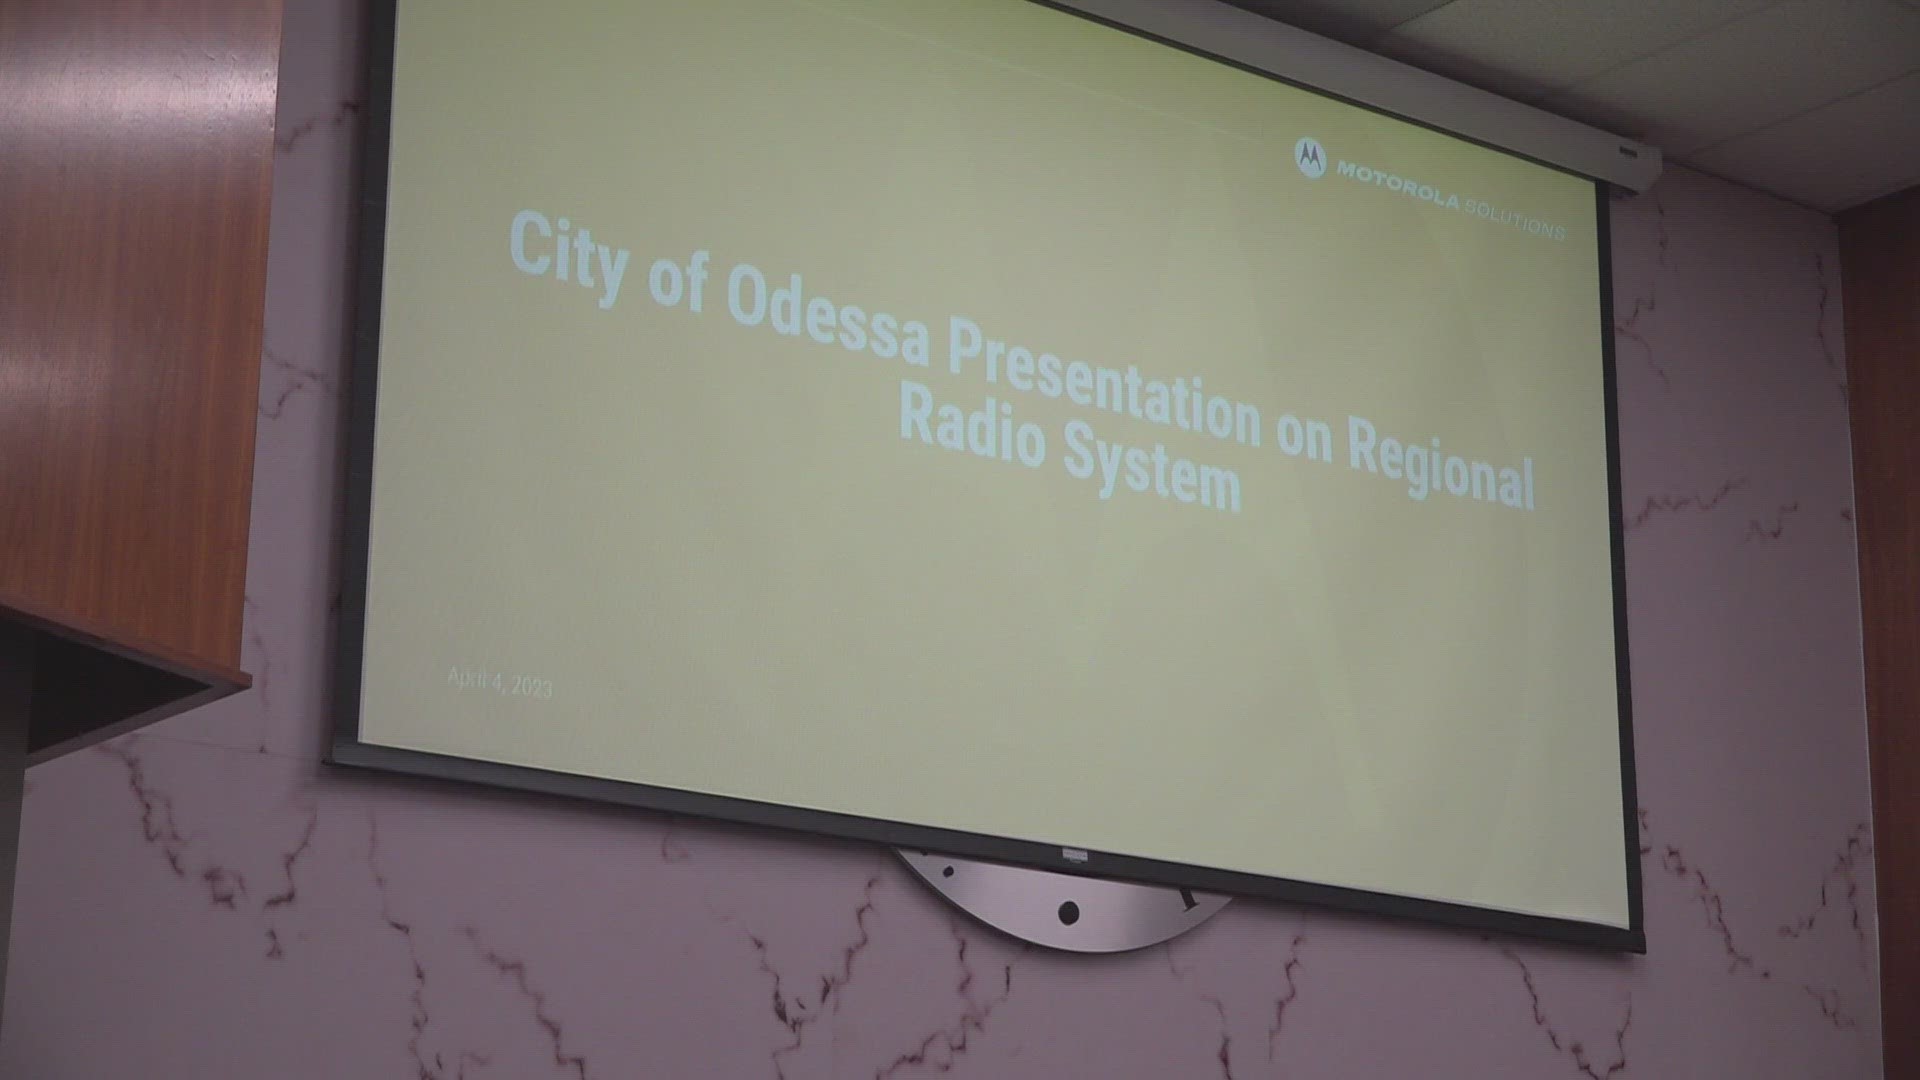 The project would create a regional network between radio cores in the City of Odessa and Midland County. Communication between first responders would be seamless.